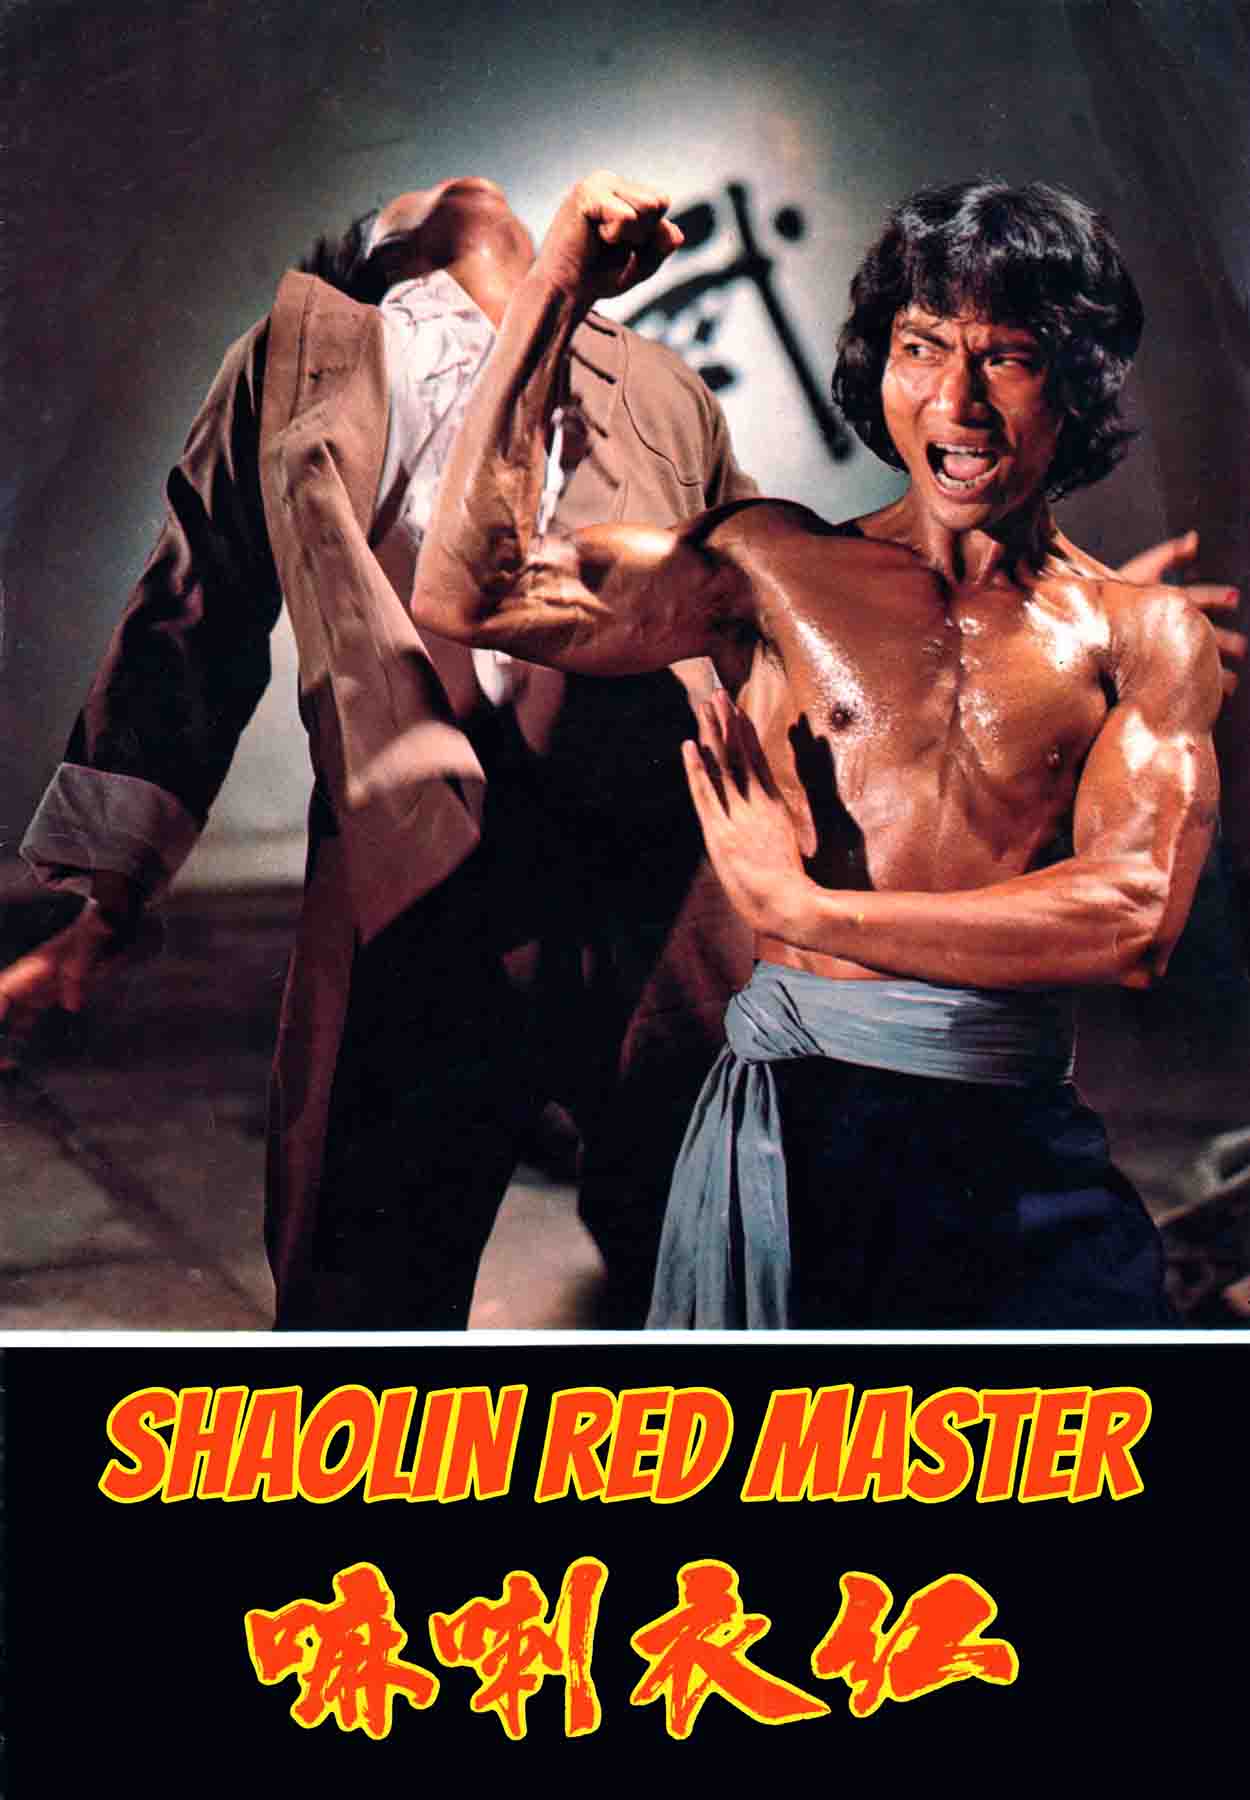 SHAOLIN RED POSTER